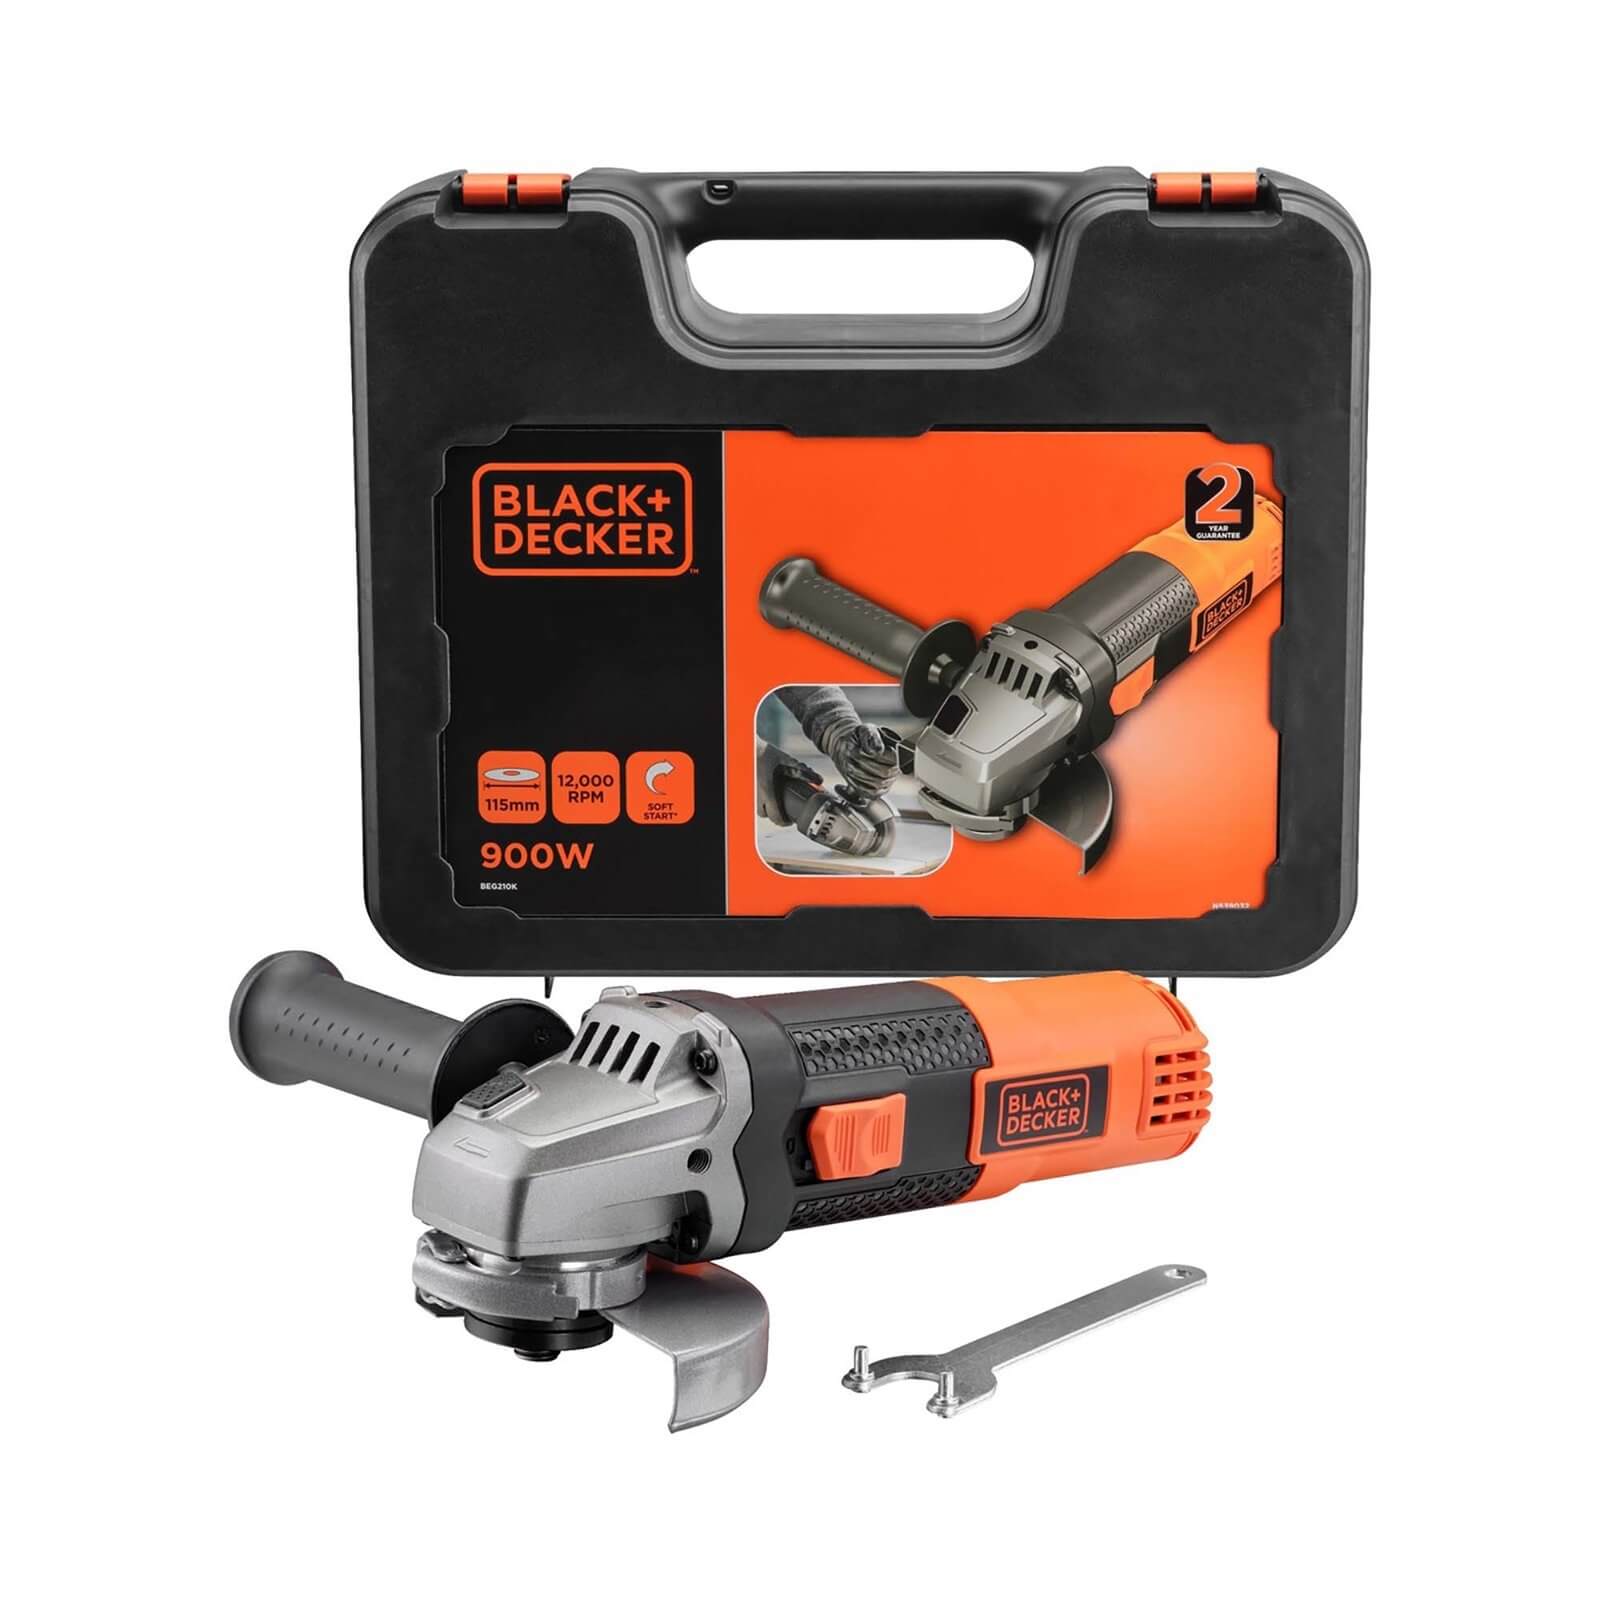 BLACK+DECKER 115mm 900W Corded Angle Grinder with Kit Box (BEG210K-GB)